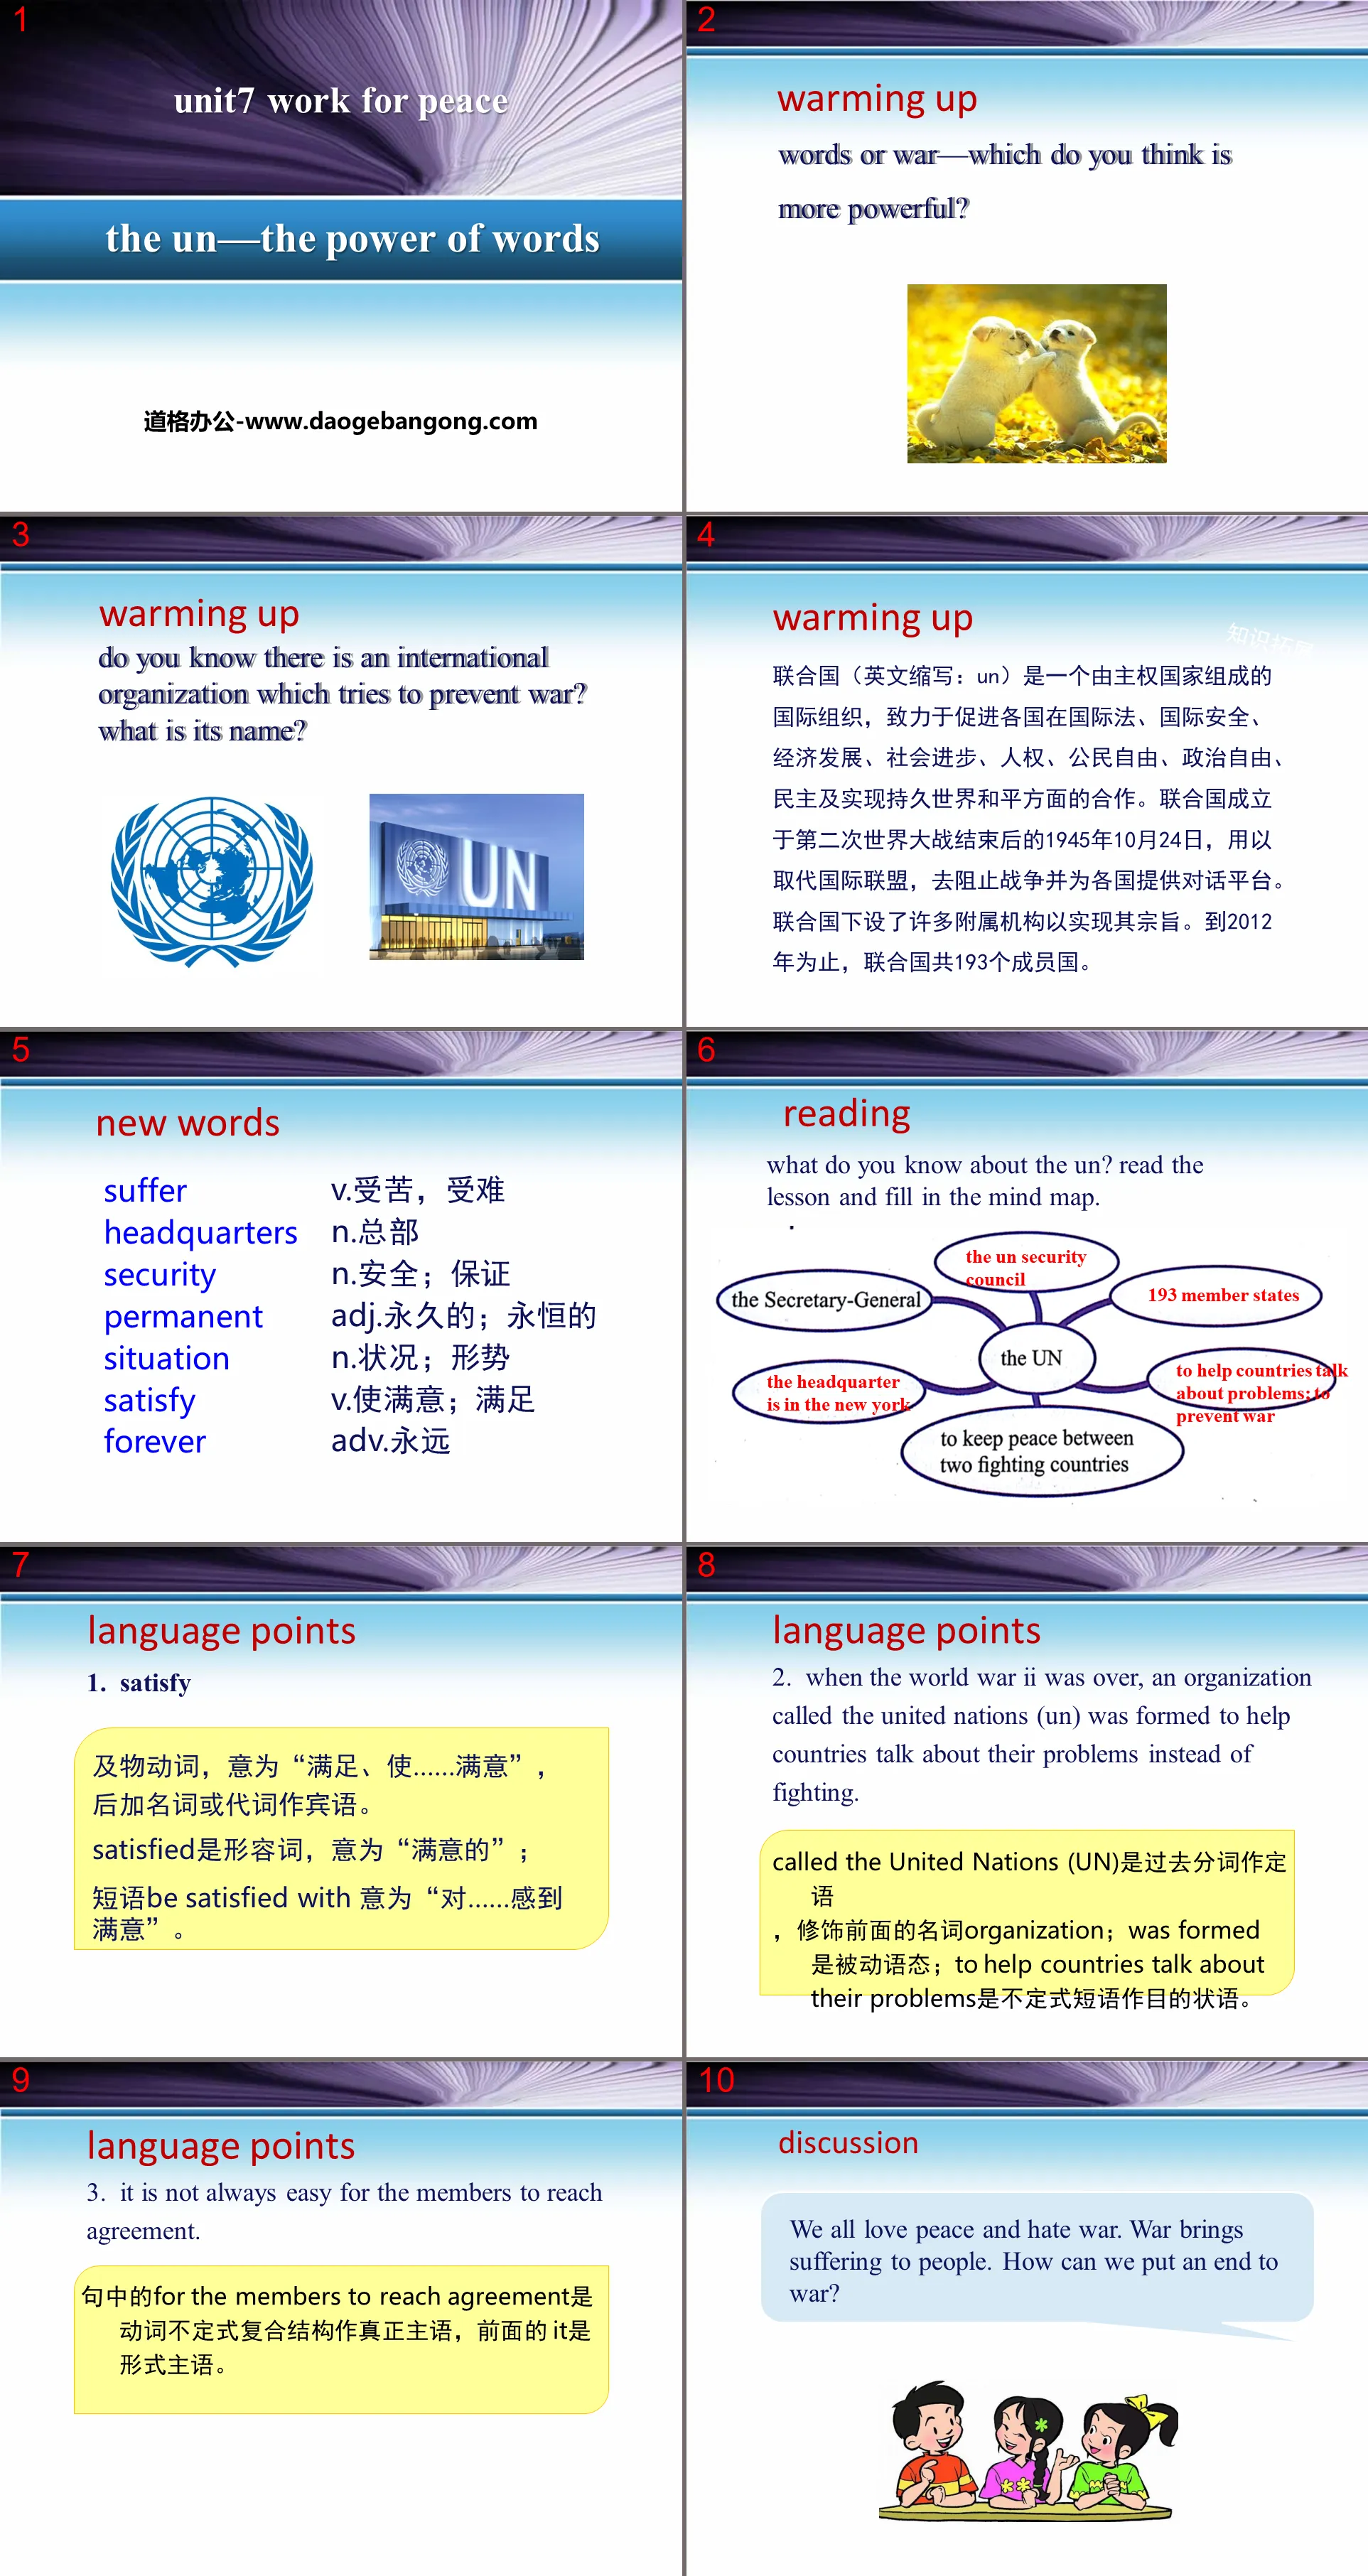 《The UN-The Power of Words》Work for Peace PPT下载
